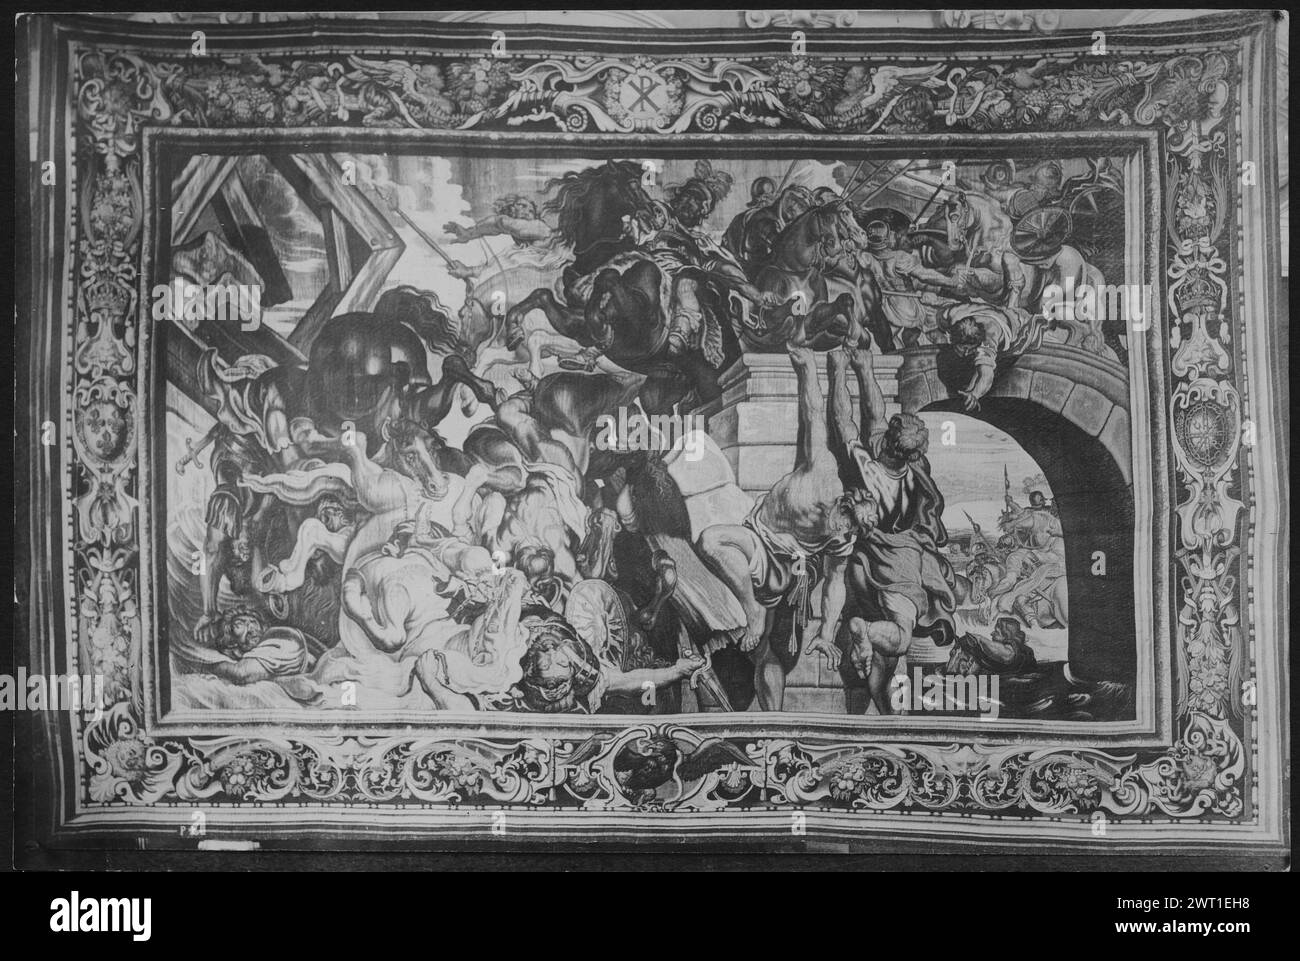 Battle of Milvian Bridge. Rubens, Peter Paul (Flemish, 1577-1640) (author of design, cartoon creator) [painter] Maecht, Philipp de (Flemish, act. 1605-1652, d. bef.1655) (workshop) [weaver] Tayer, Hans (Flemish, act. ca.1619) (workshop) [weaver] c. 1623-1625 Tapestry Dimensions: H 16'2' x W 24'2.5' Tapestry Materials/Techniques: Linen (warp: 28/in.); wool, silk with silver & gold metallic thread (weft) Culture: French Weaving Center: Paris Ownership History: Barberini coll. (Rome). Corsini coll., 1907. Private coll. (London), 1924. French & Co. purchased from the estate of Rosa Lewis, received Stock Photo